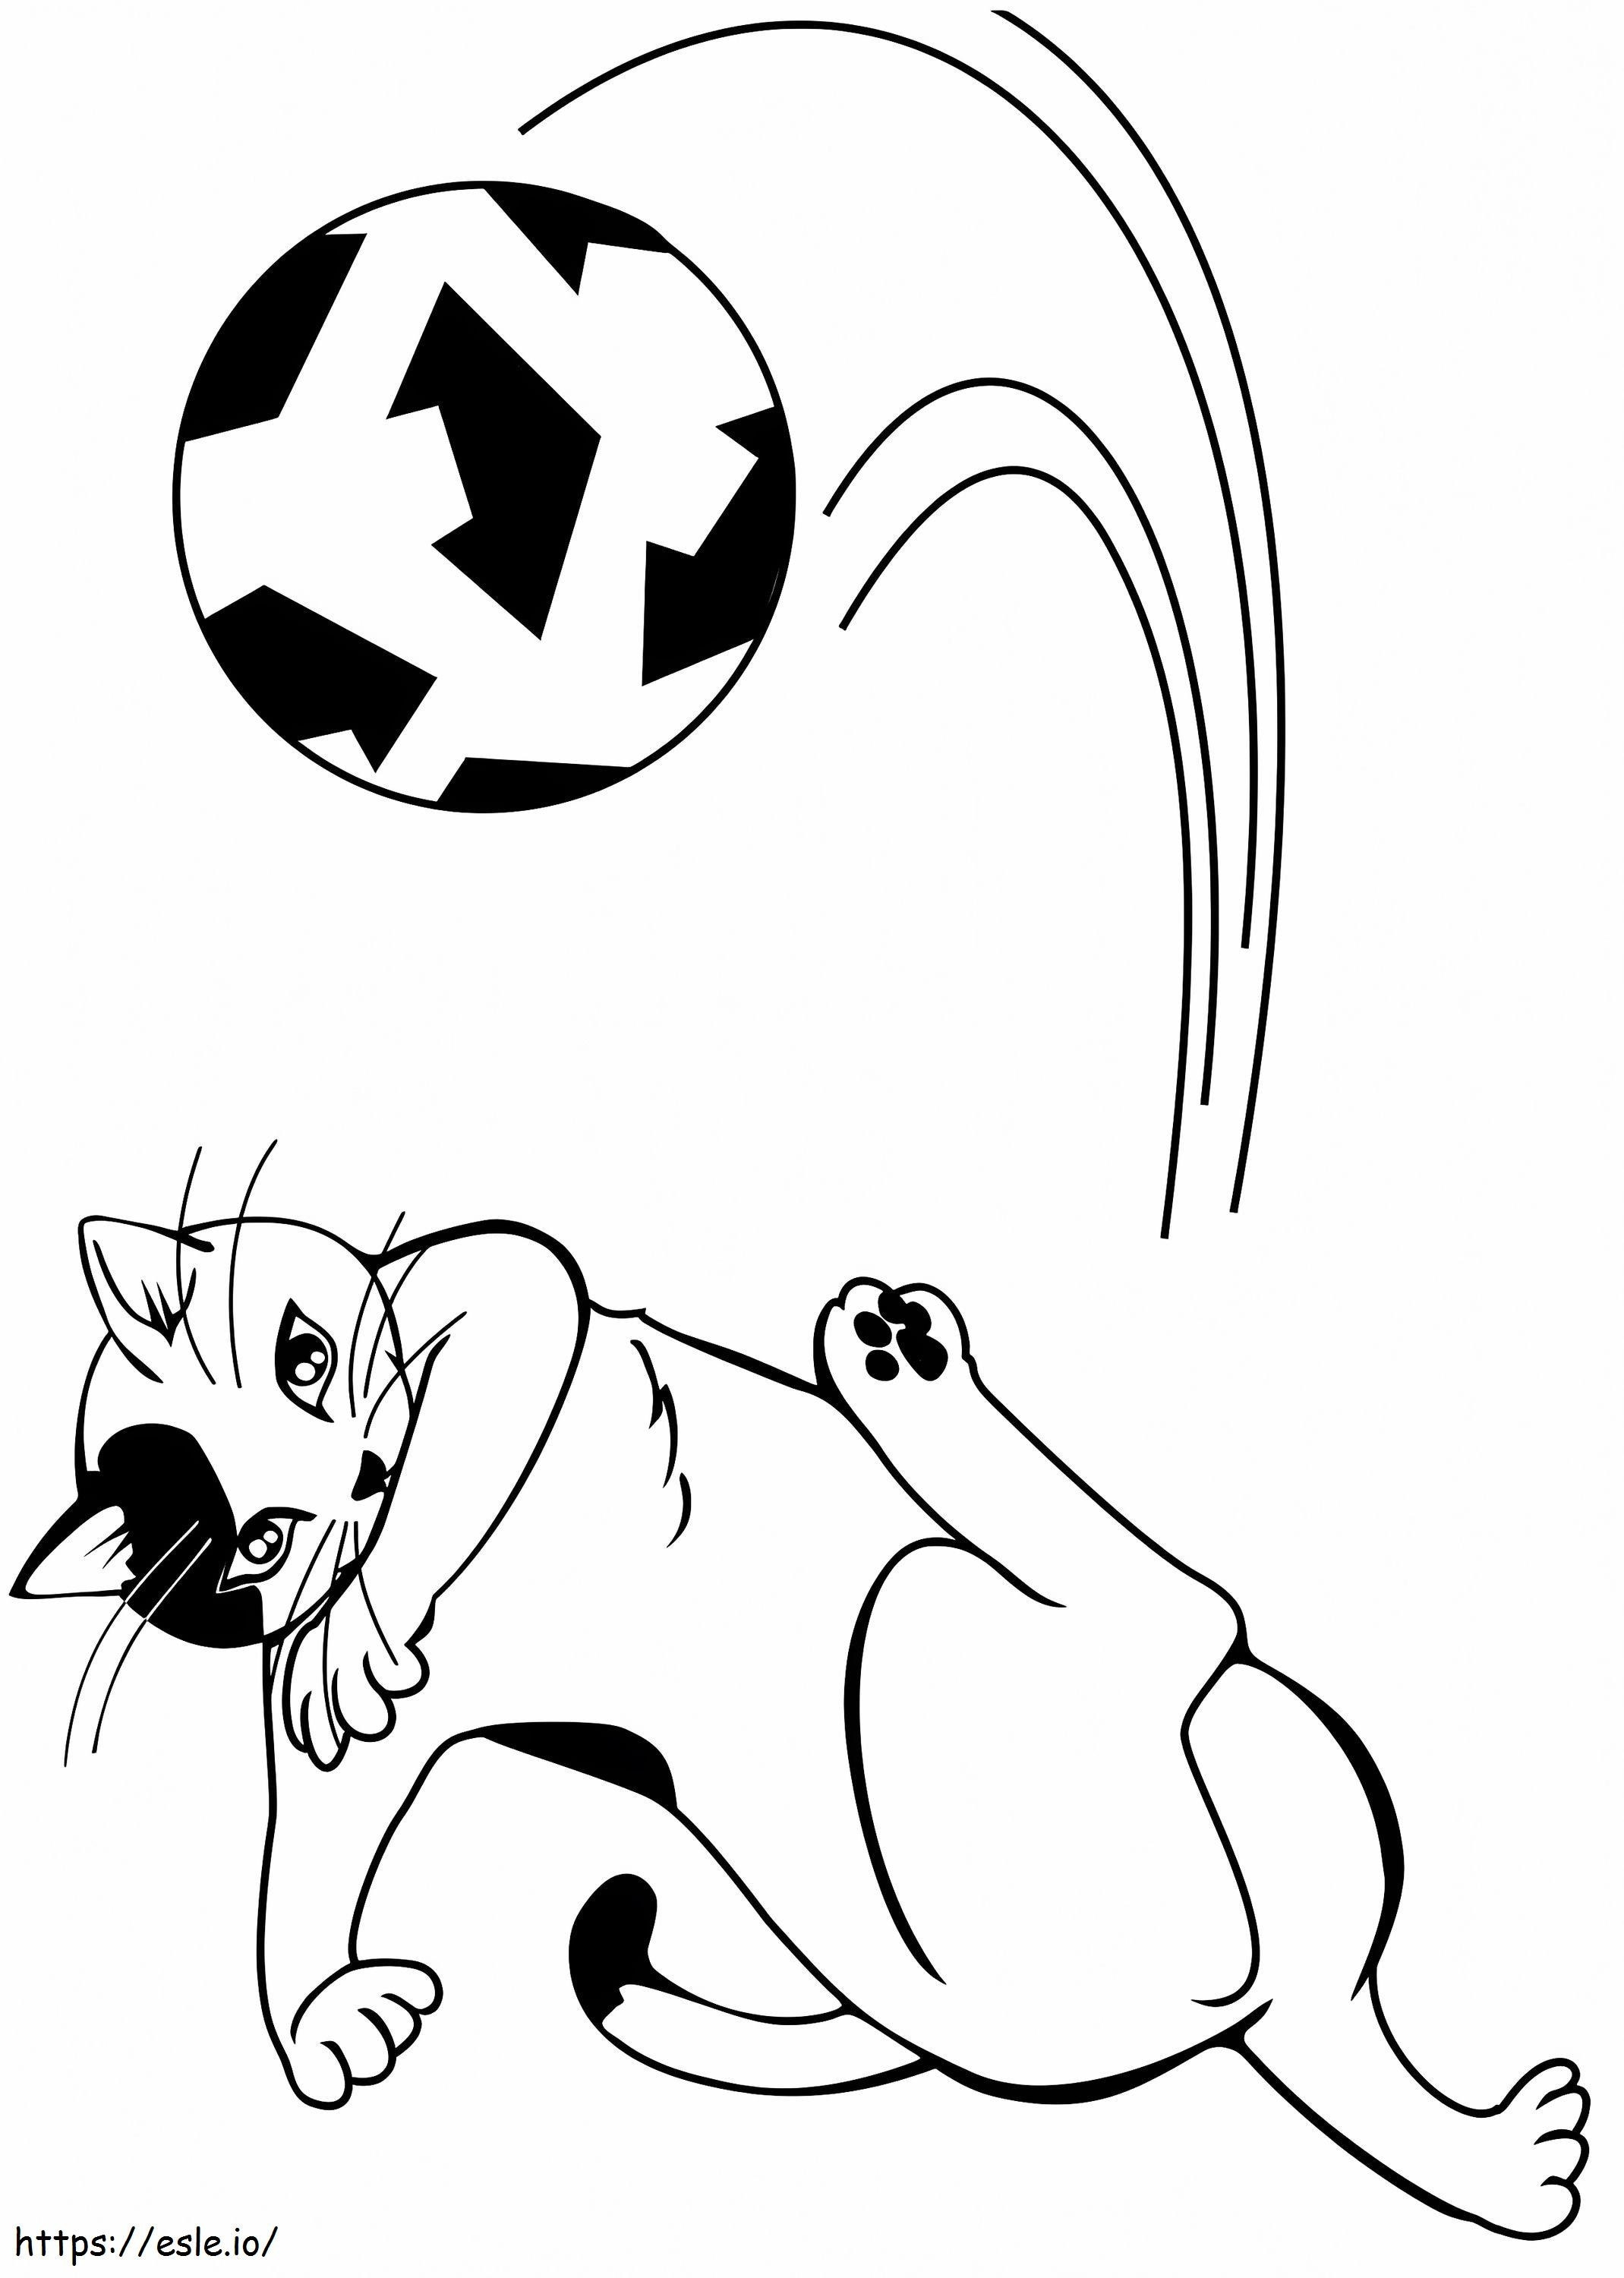 1562052262_Cat Playing Soccer A4 1 coloring page